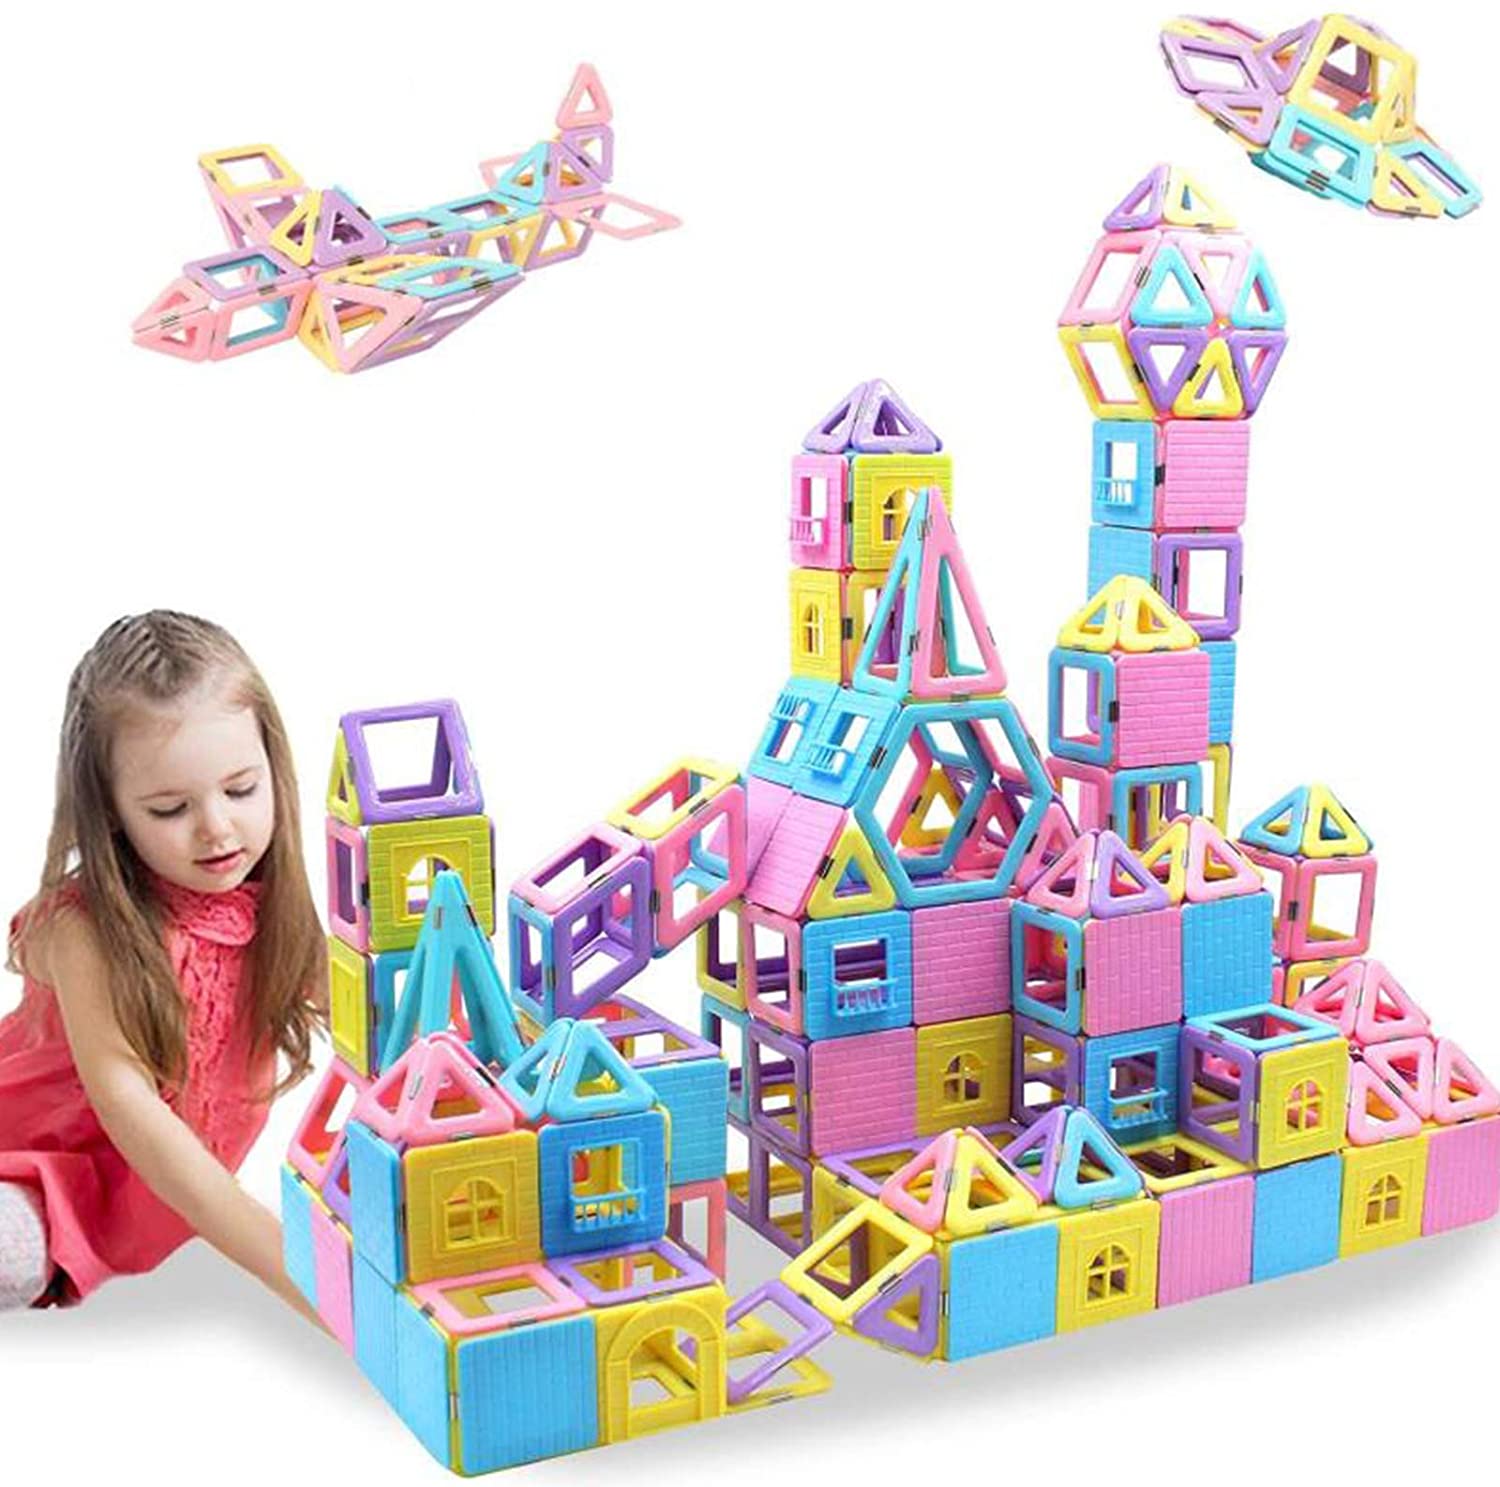 Magees Magnetic Building Blocks Cheapest Purchase, 46% OFF |  connect-summary.com